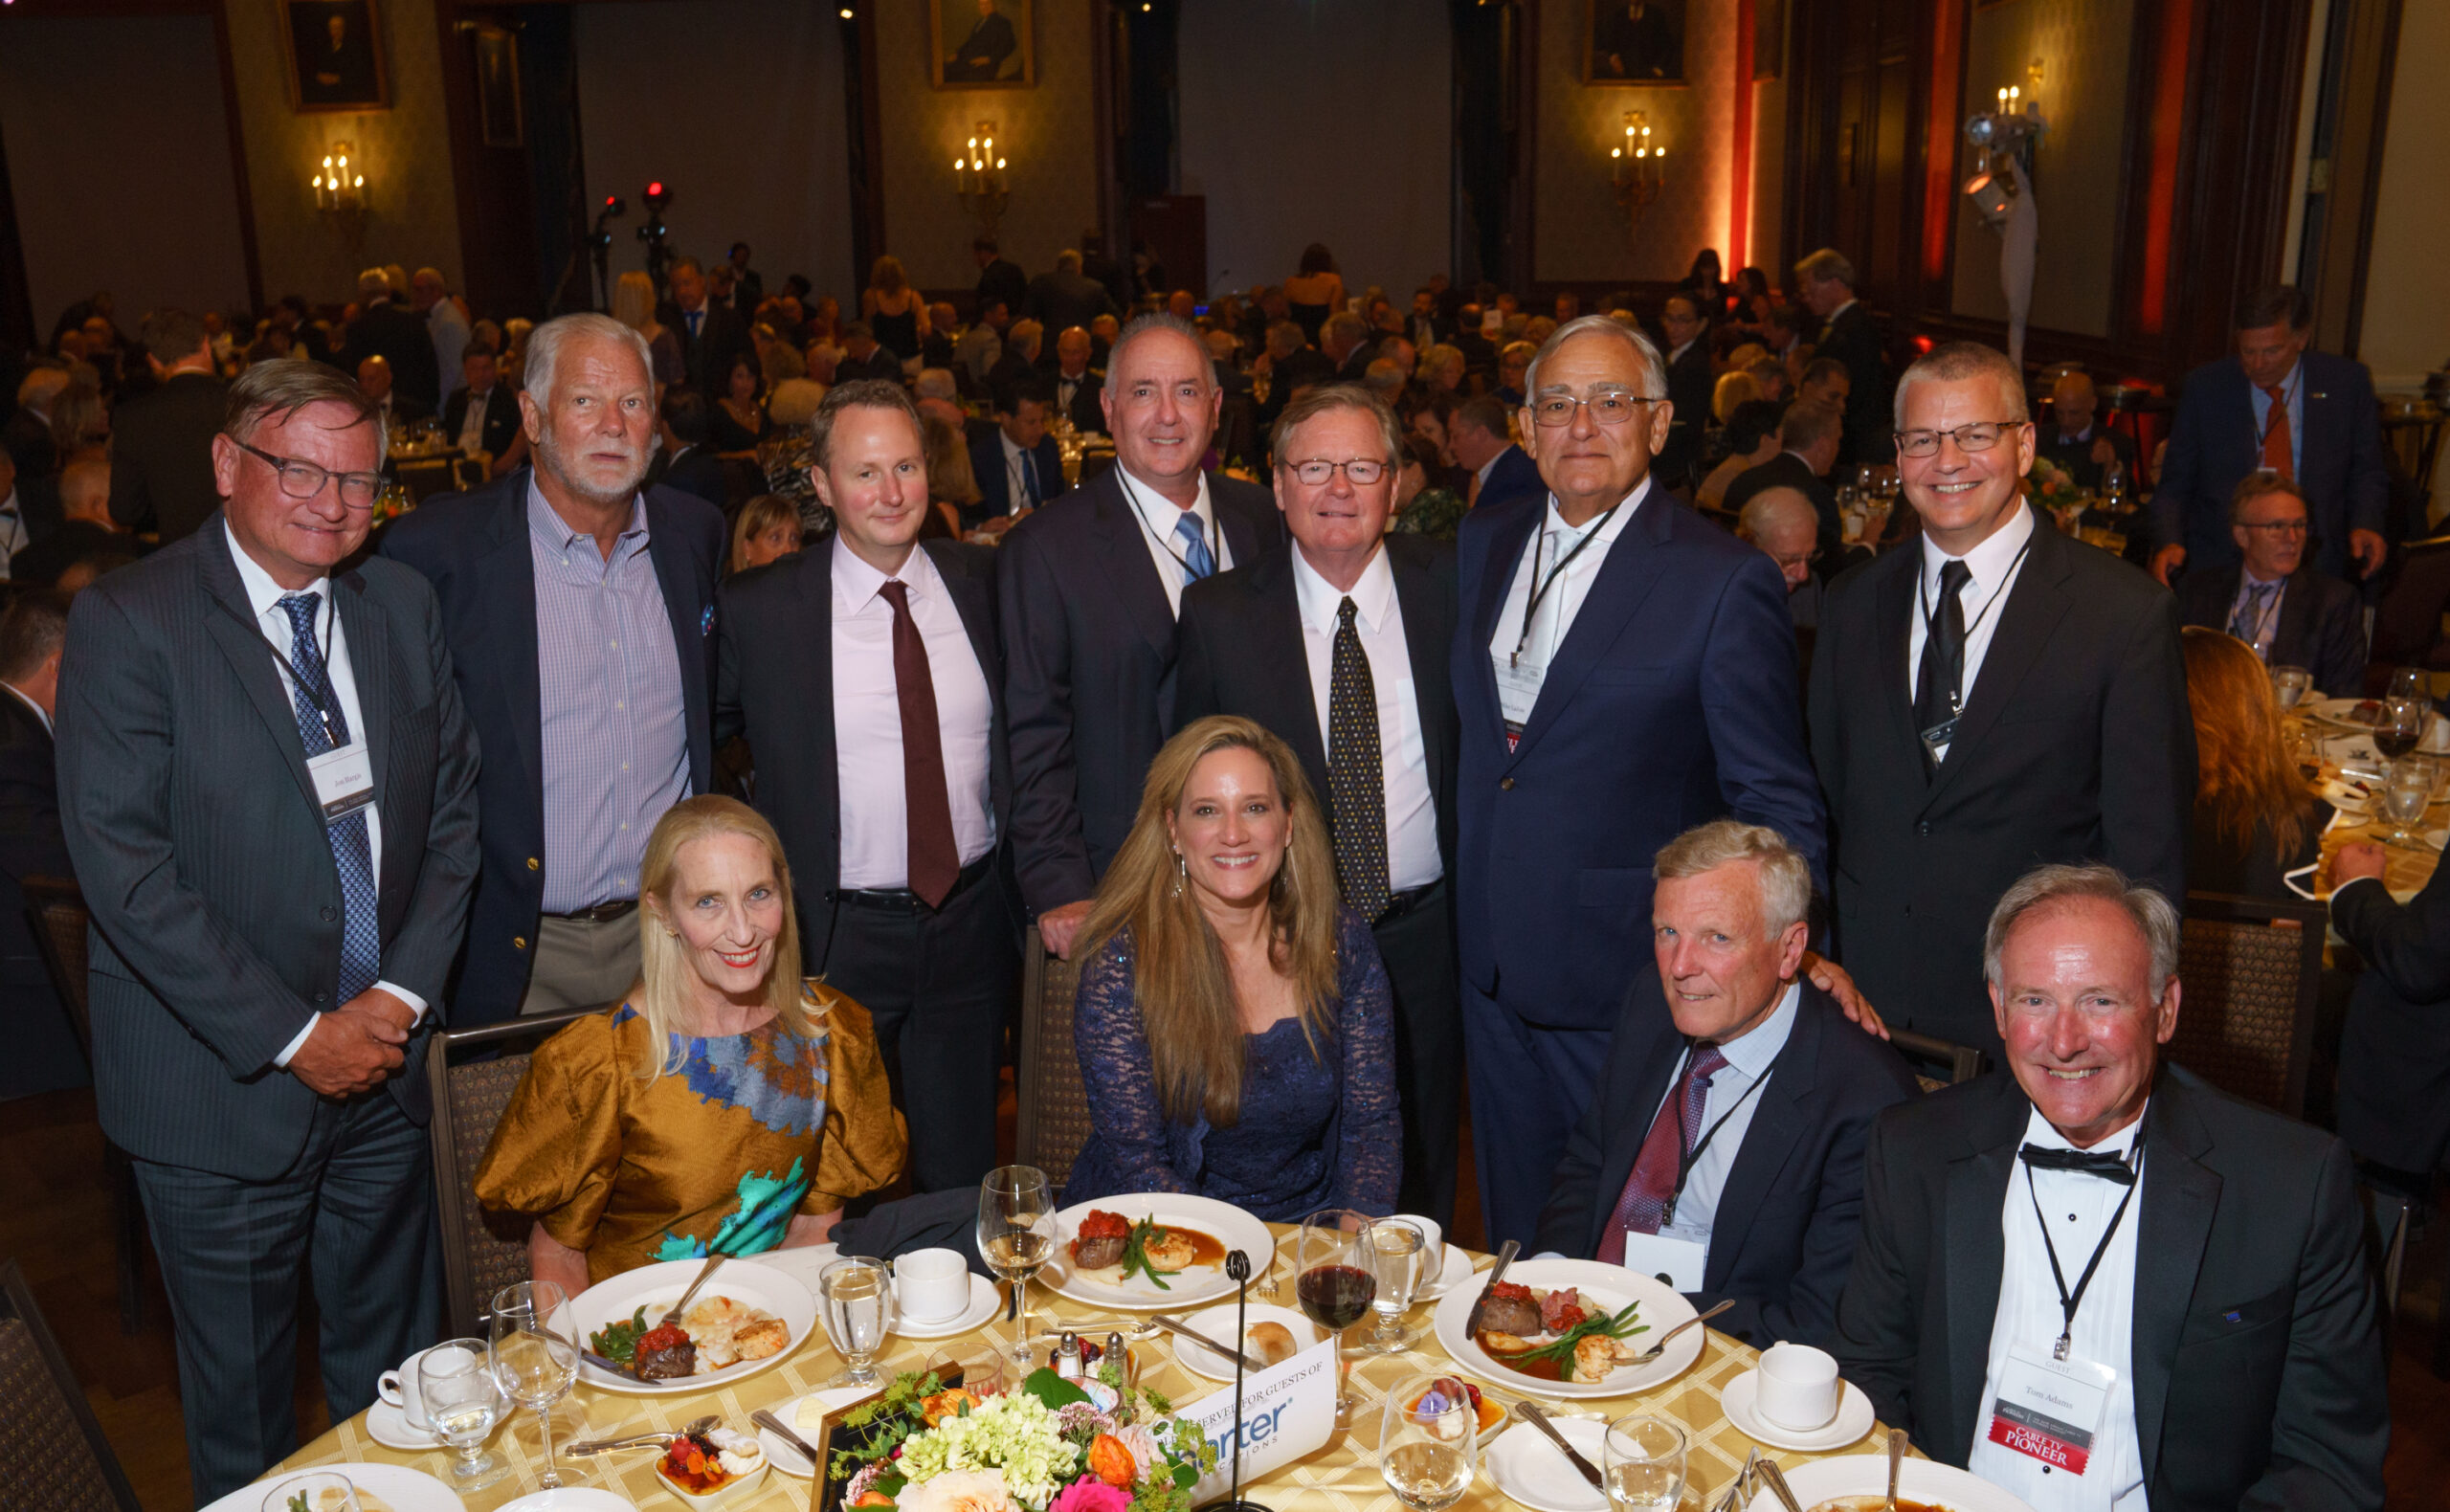 The 56th Annual Cable TV Pioneers Banquet, at The Union League of Philadelphia in Philadelphia, Pennsylvania, on Monday, Sept. 19, 2022.
Photo StevePeterson.photo